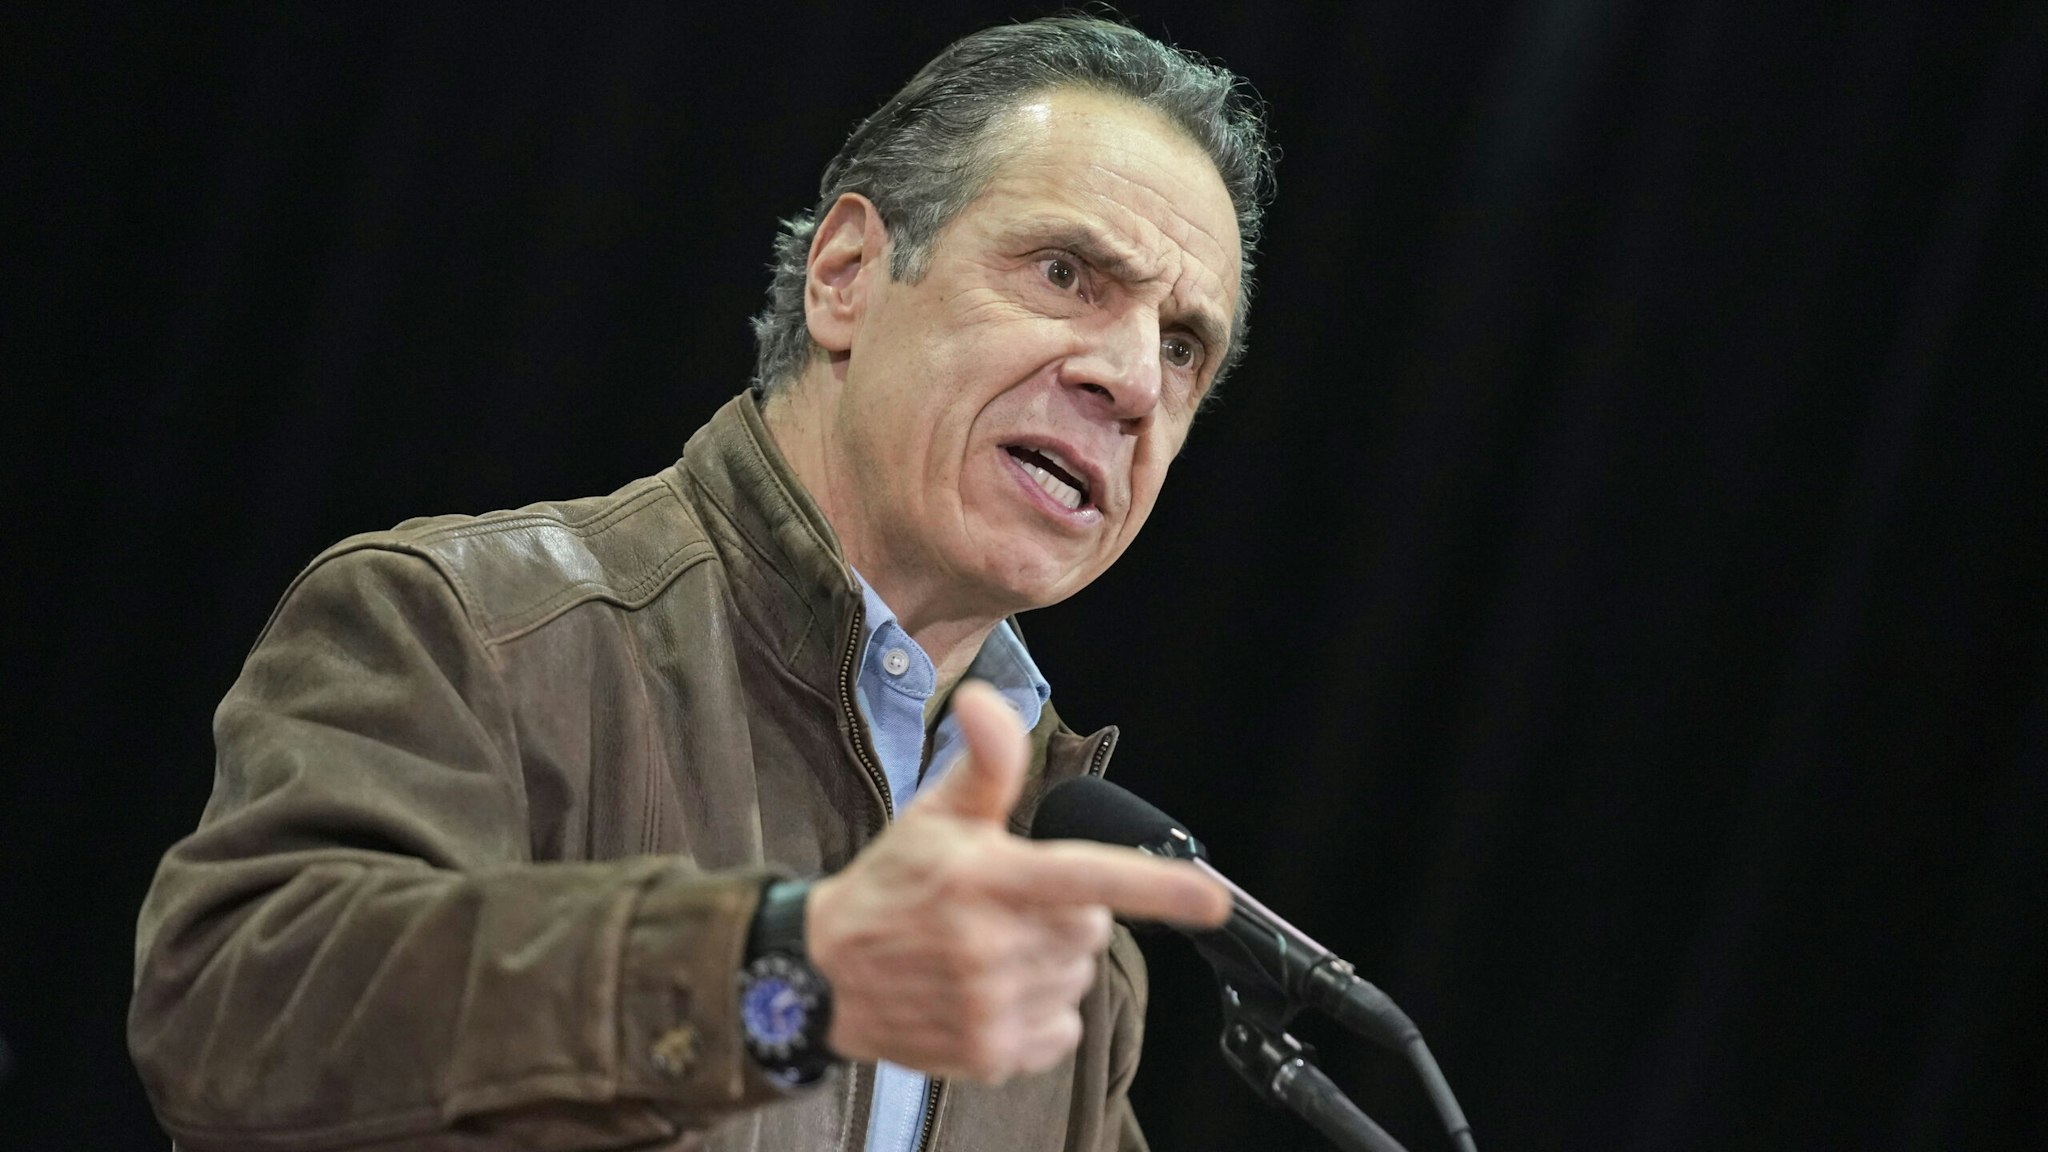 New York Governor Andrew Cuomo speaks during a press conference before the opening of a mass Covid-19 vaccination site in the Queens borough of New York, on February 24, 2021. - The site run by the Federal Emergency Management Agency (FEMA), along with another in Brooklyn, gives priority to local residents in an effort to equitably distribute the vaccine.